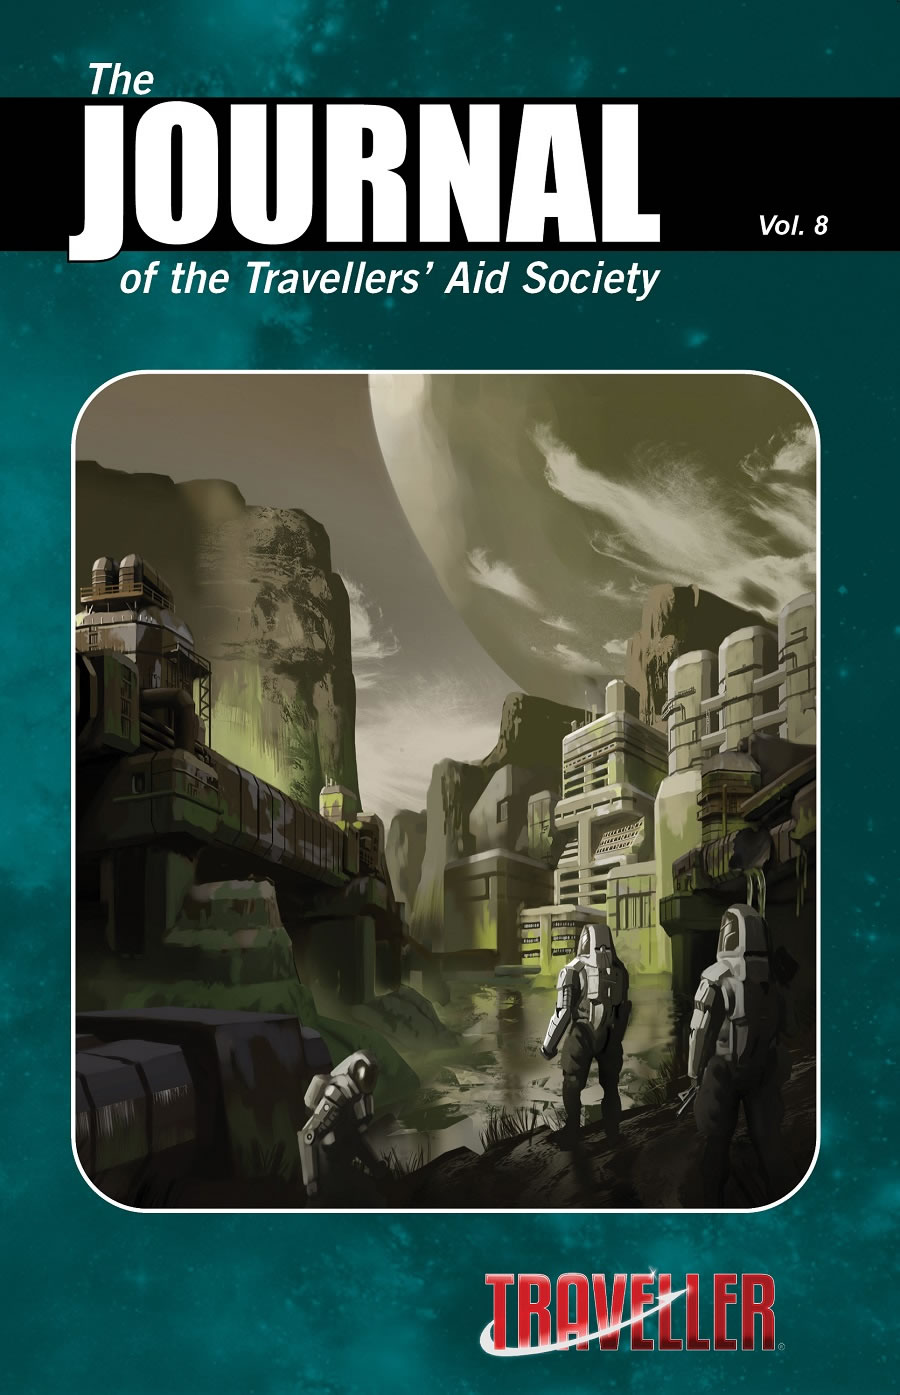 The Journal of Travellers Aid Society Vol.8 